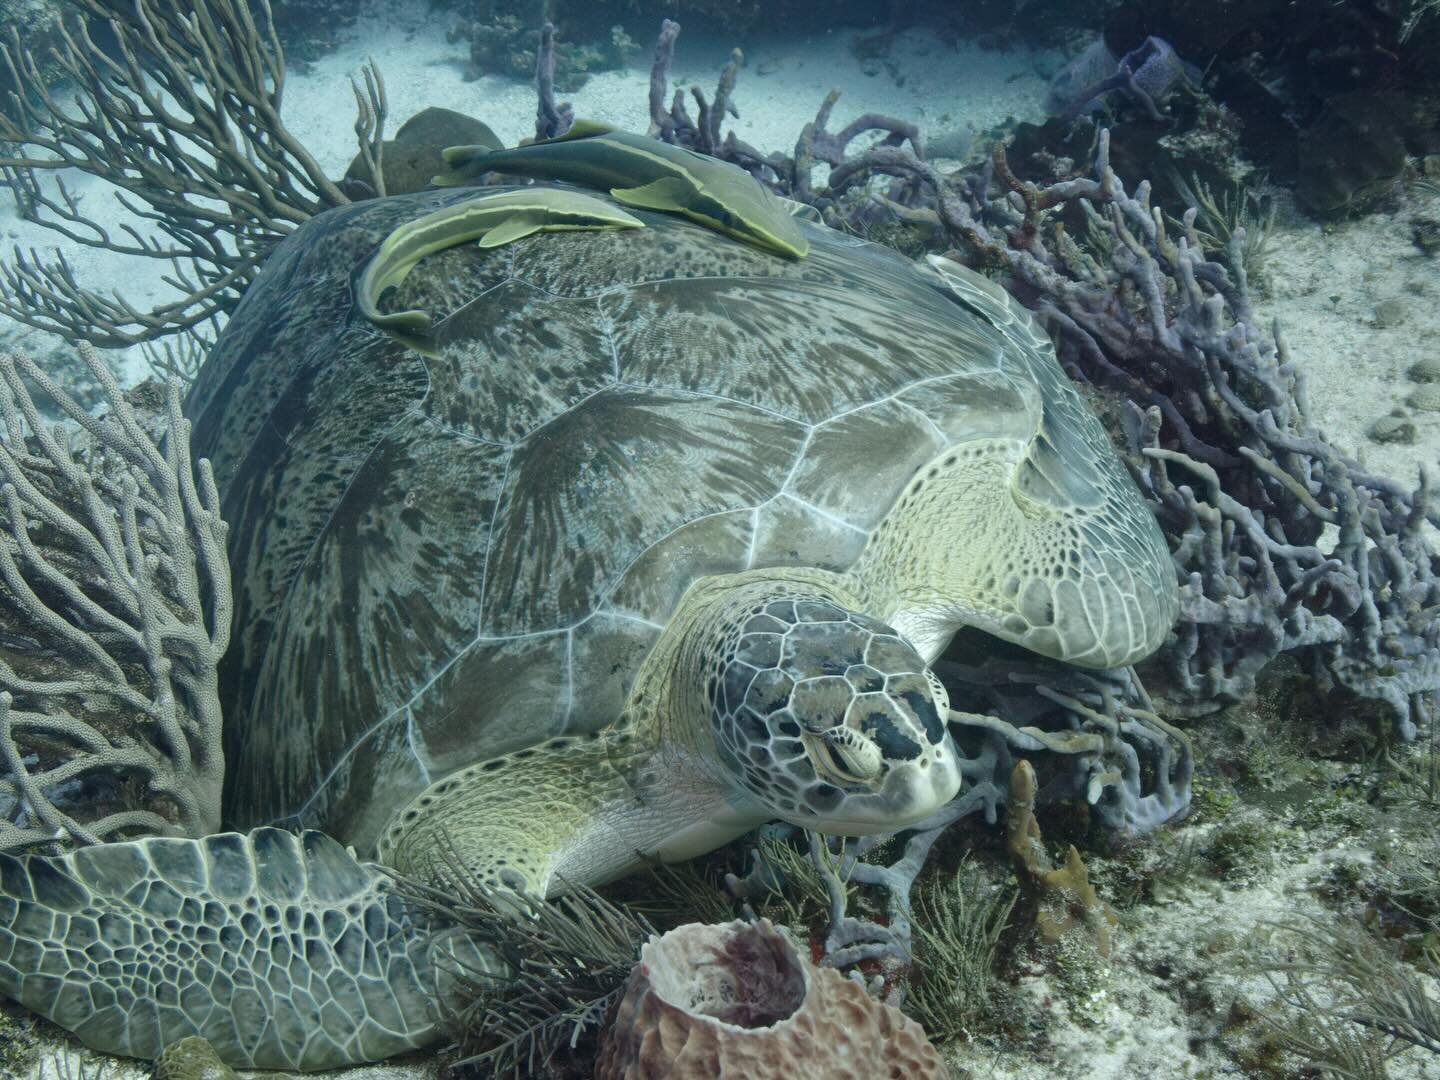 An &ldquo;Alec-sized&rdquo; green turtle accompanied by 2 &ldquo;Lola-sized&rdquo; Remoras 🐢🤿
#cozumel #diving #turtlepower #yucab 

#underwaterphotography #padi #scubadiving #oceanlife #underthesea #seaturtle #remora #wildlife #wildlifephotography